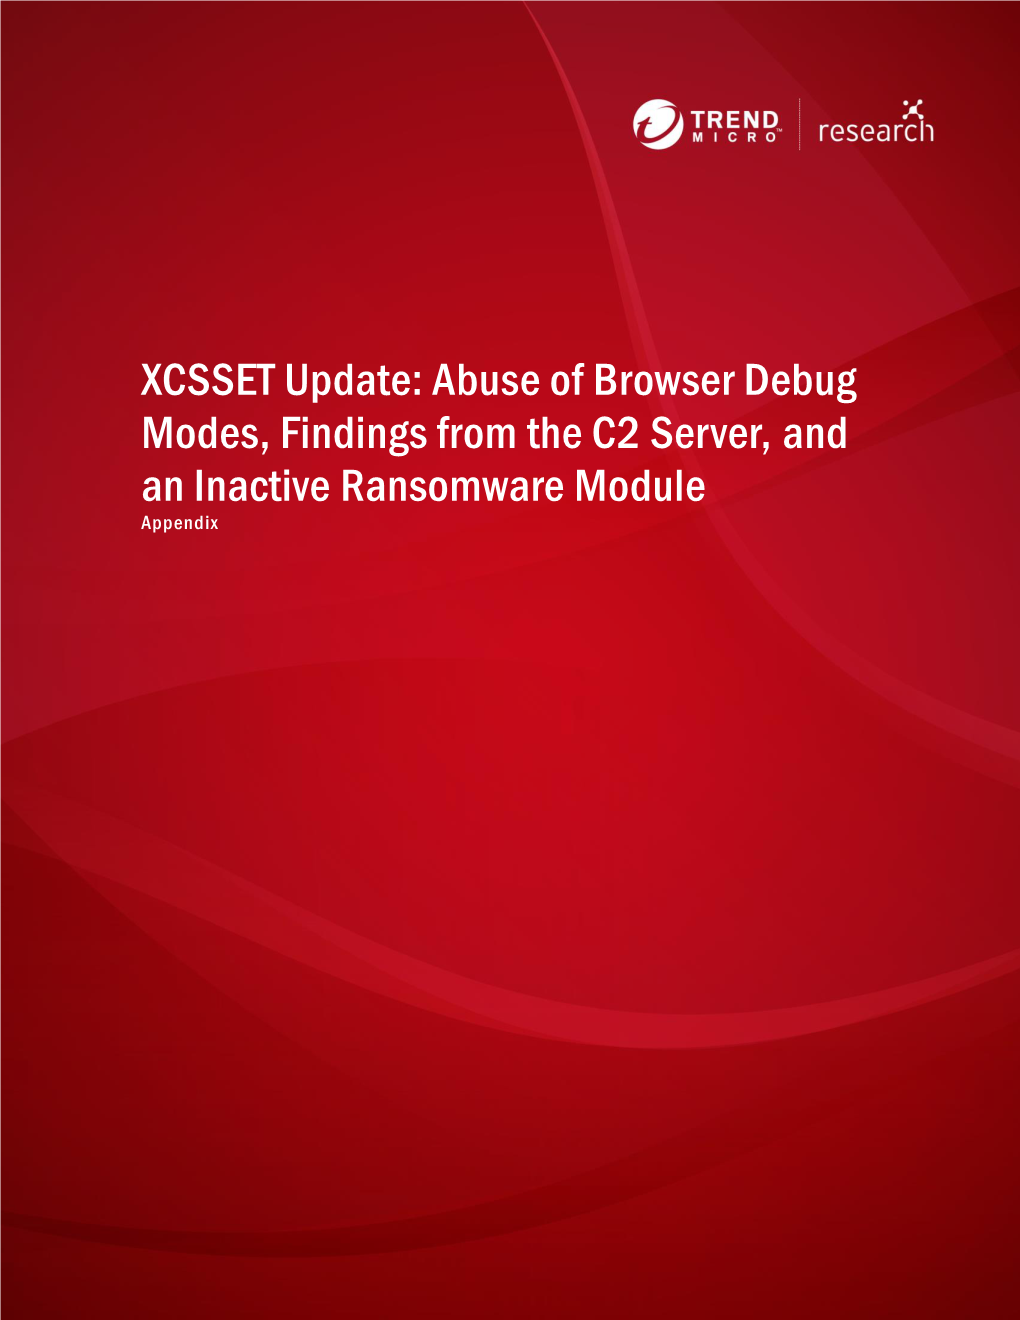 XCSSET Update: Abuse of Browser Debug Modes, Findings from the C2 Server, and an Inactive Ransomware Module Appendix